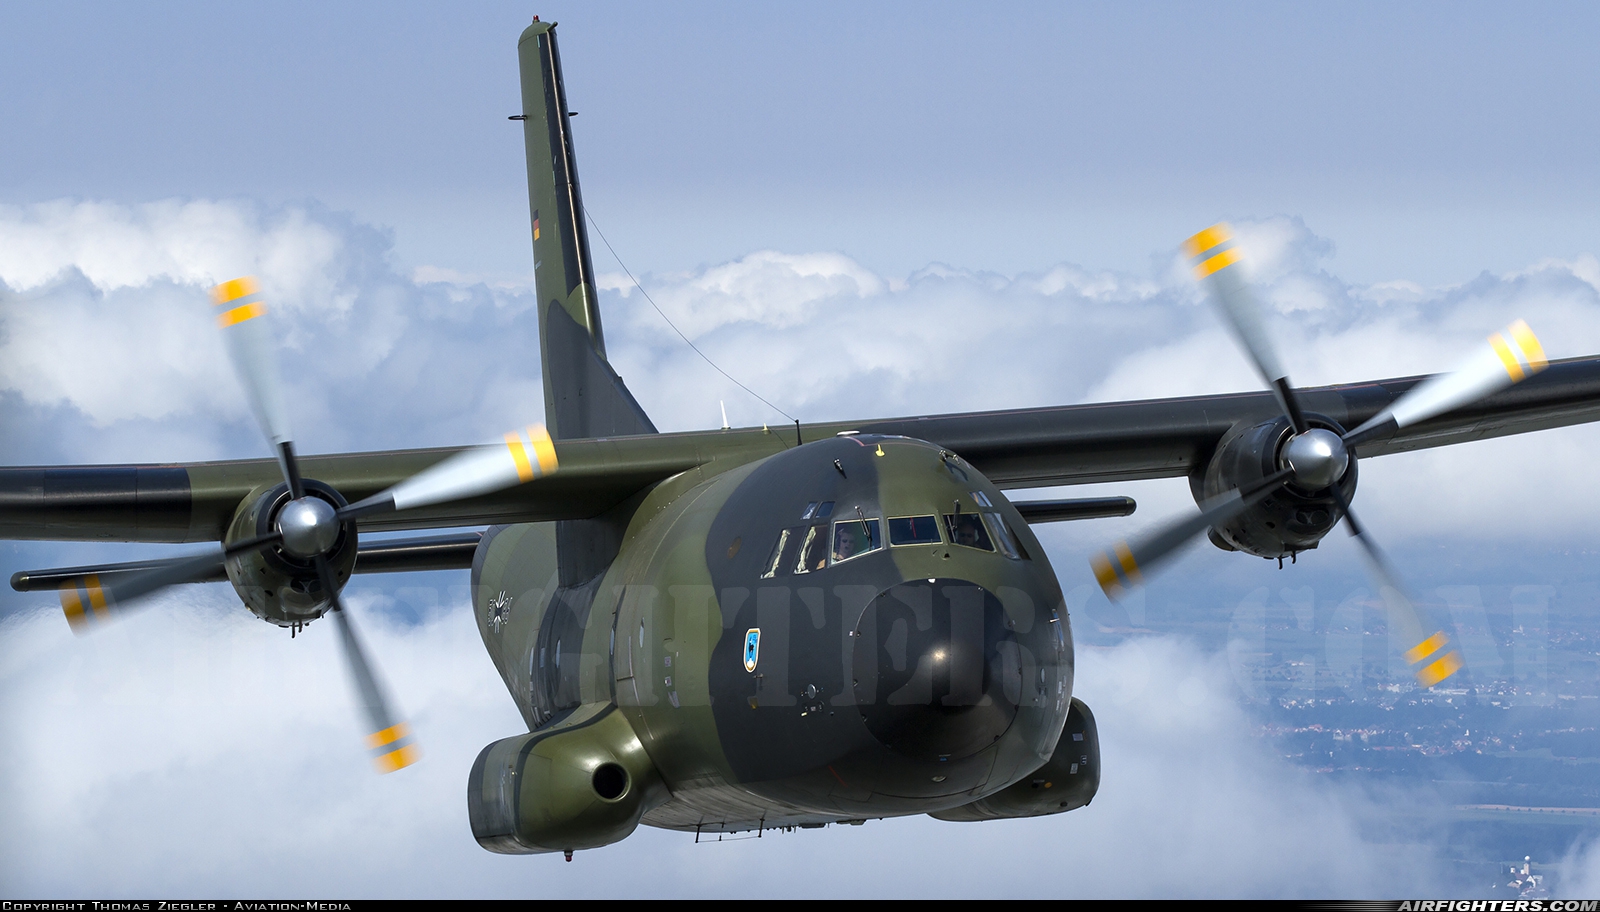 Germany - Air Force Transport Allianz C-160D 50+86 at In Flight, Germany